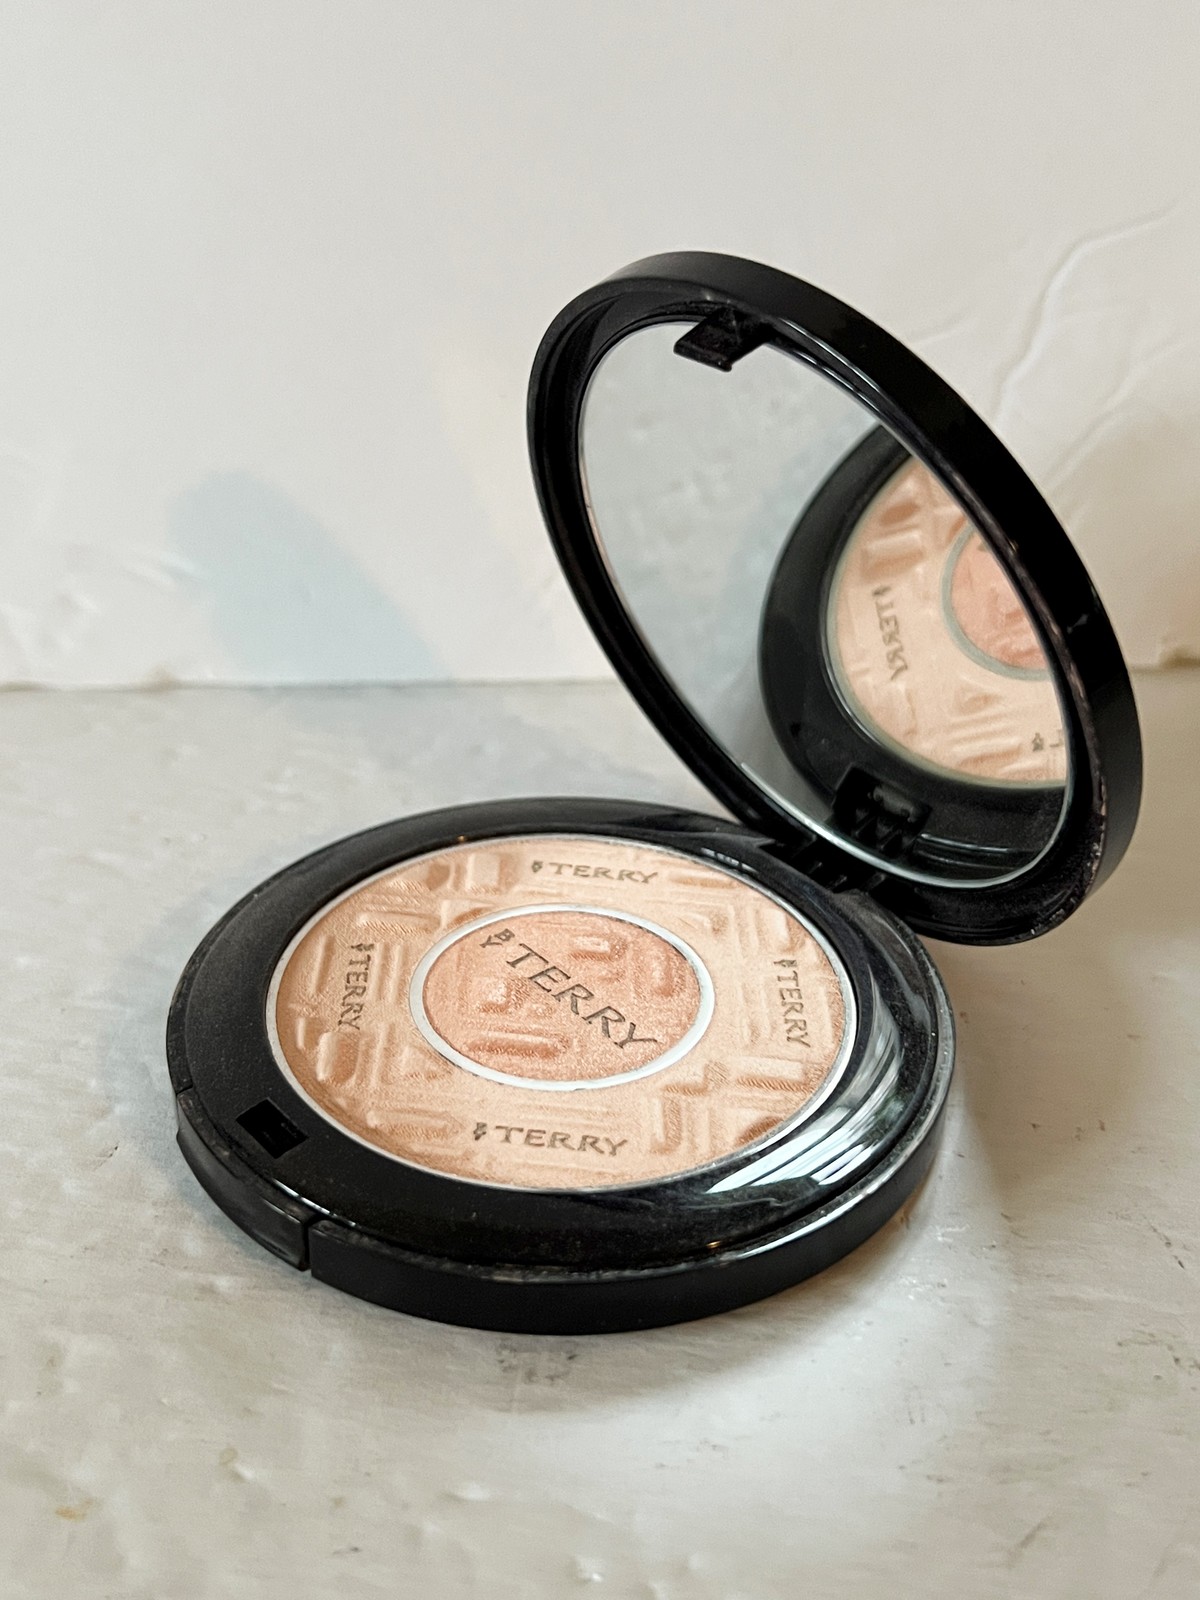 Primary image for by Terry Compact Expert Dual Powder in No. "3 Apricot Glow" 5g/0.17oz NWOB